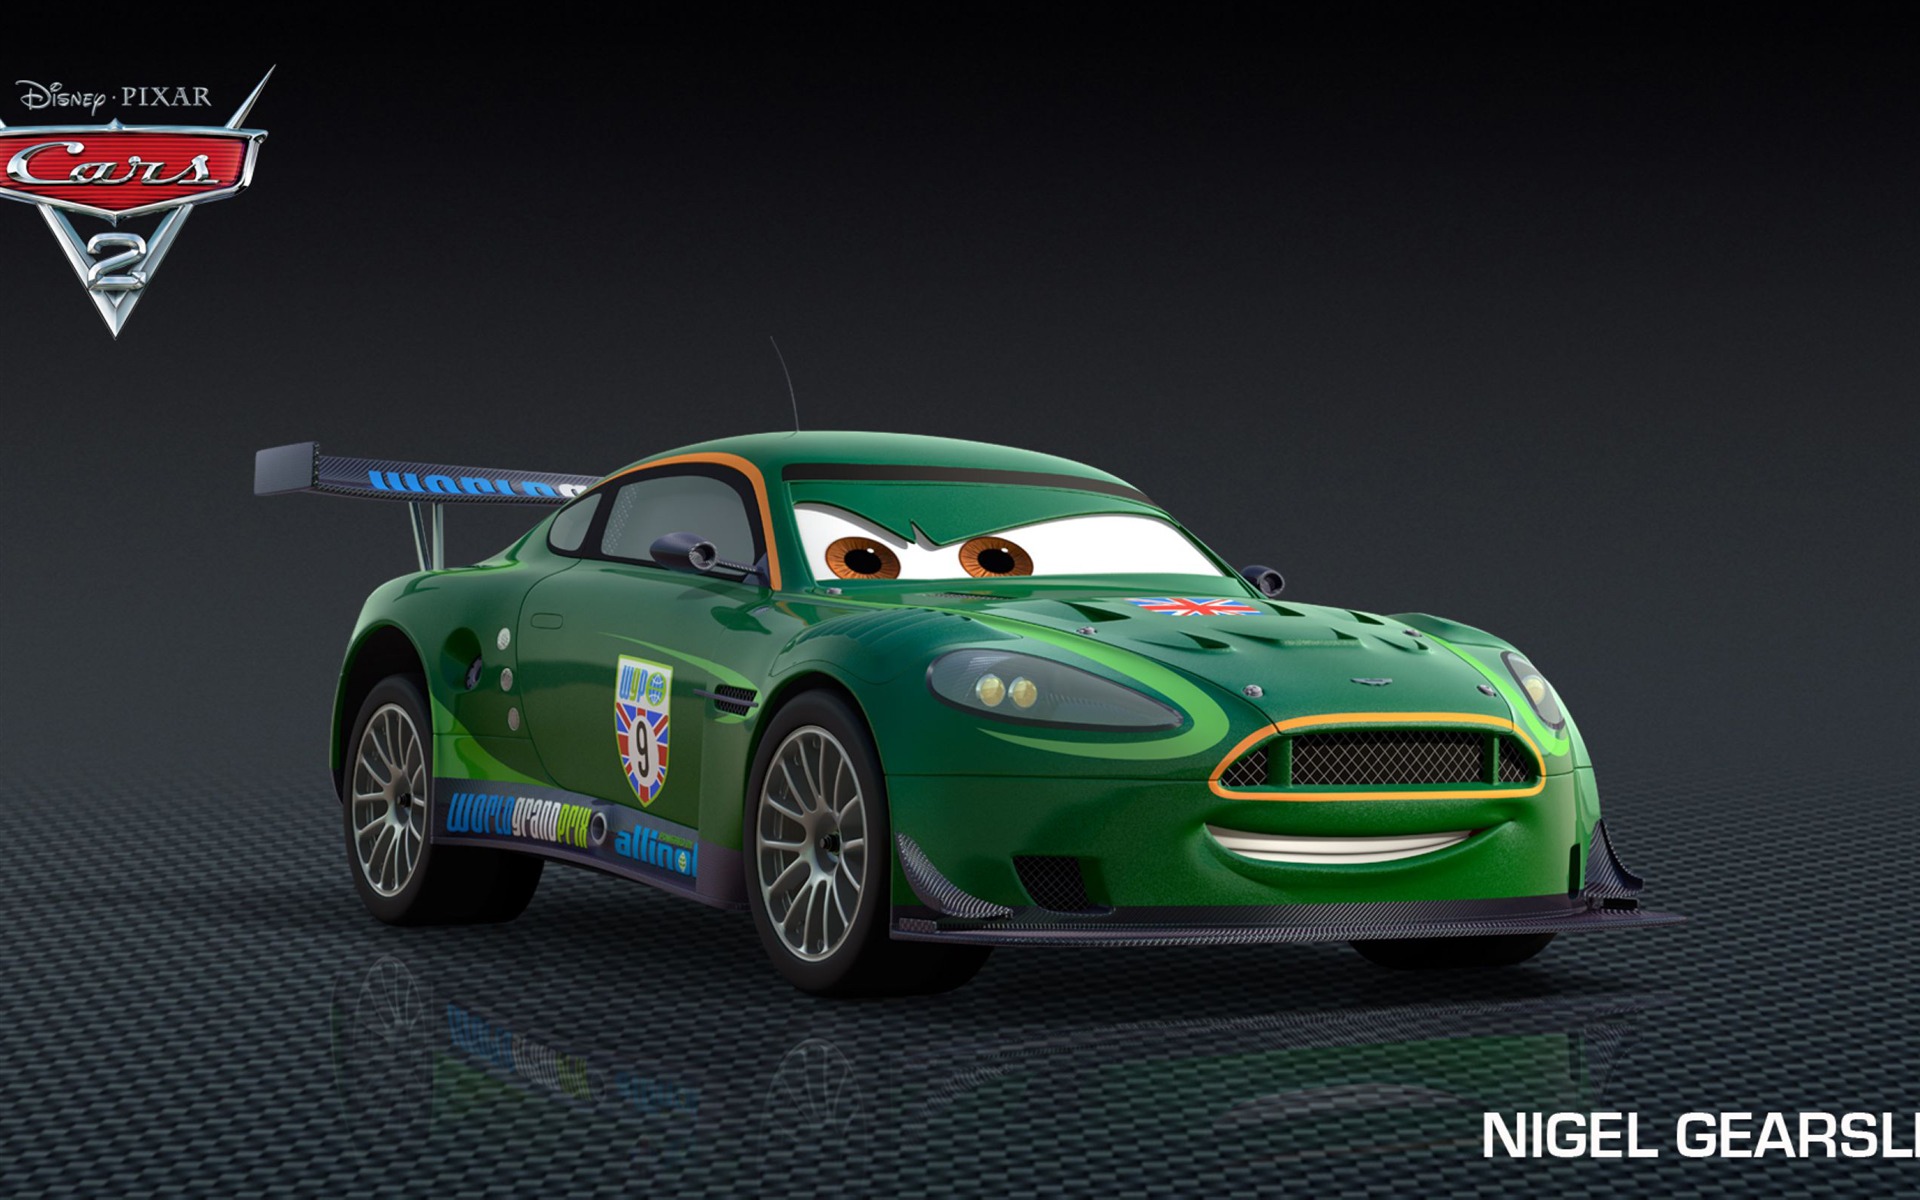 Cars 2 wallpapers #29 - 1920x1200